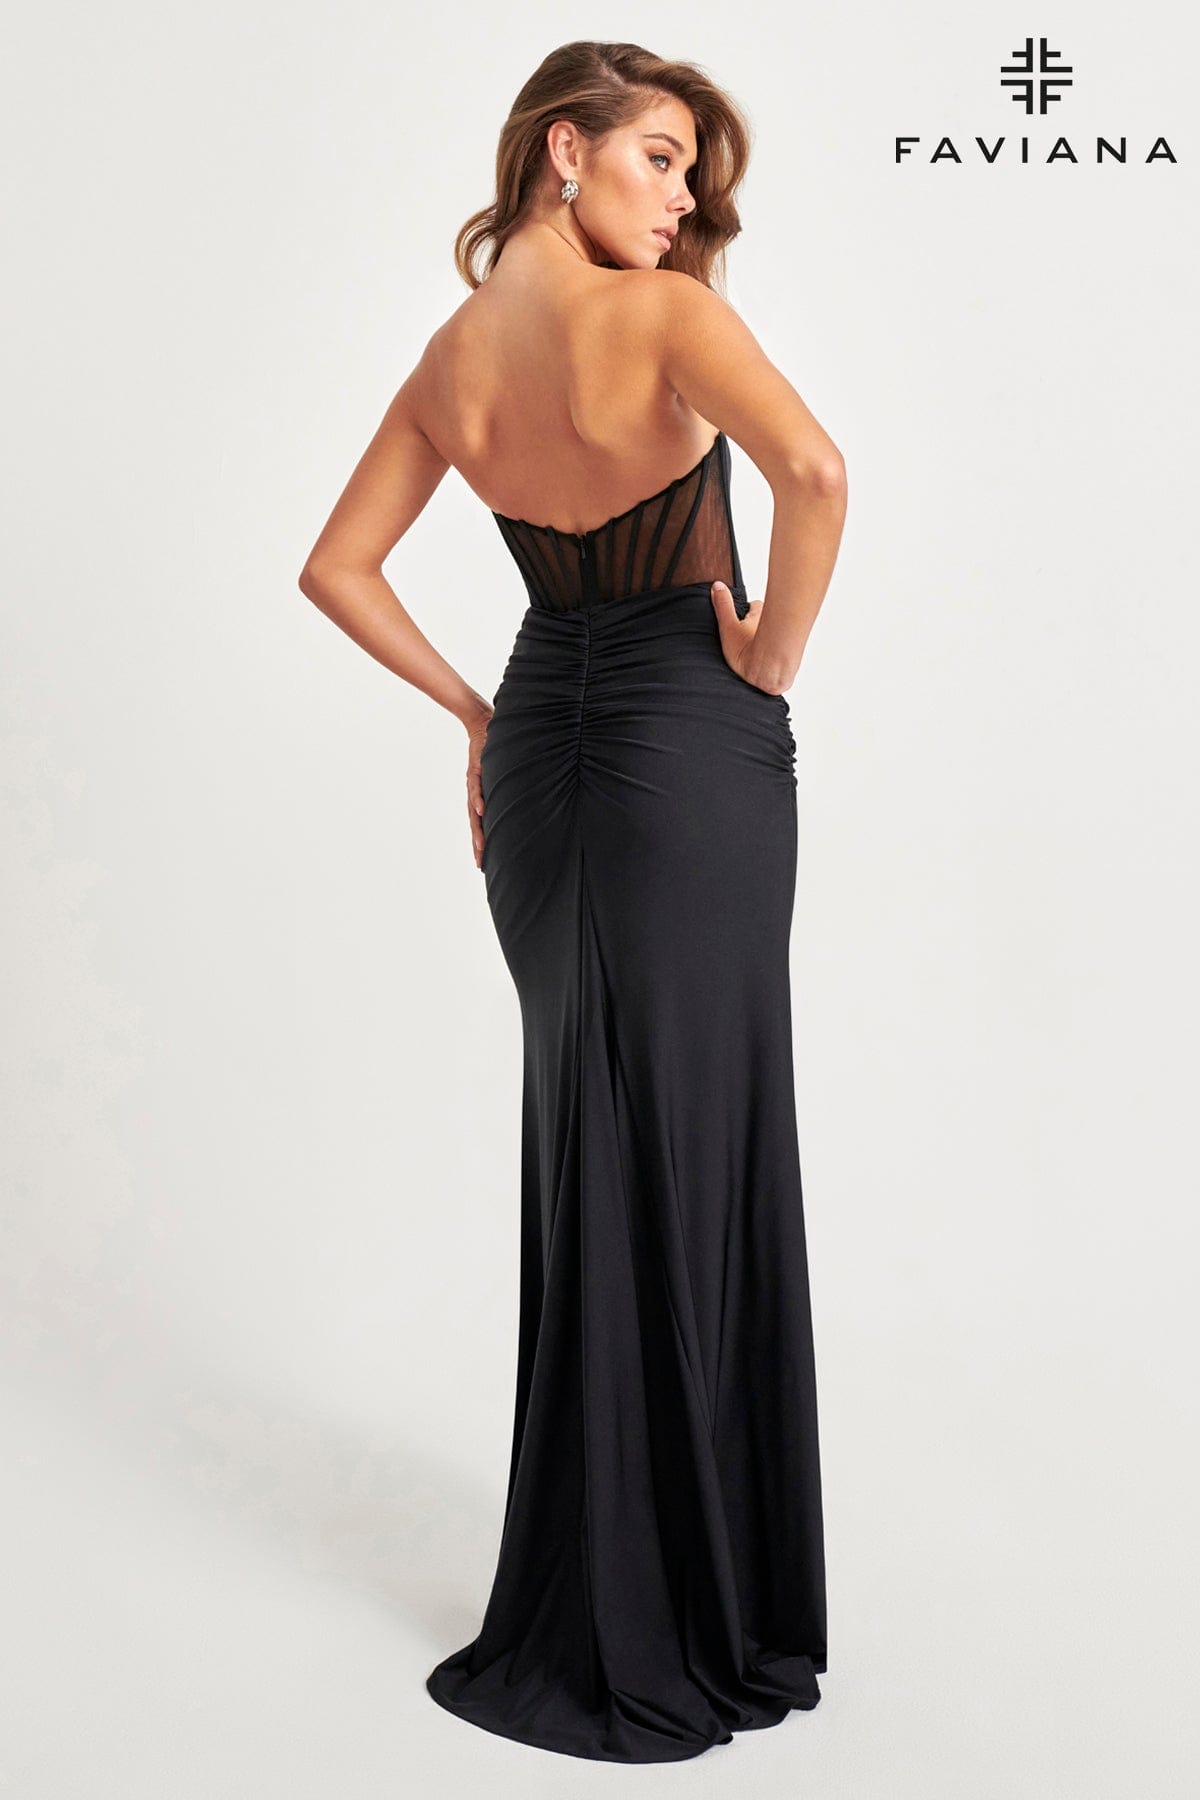 Sleek Black Strapless Formal Gown With Corset Boning And Ruching | 11041